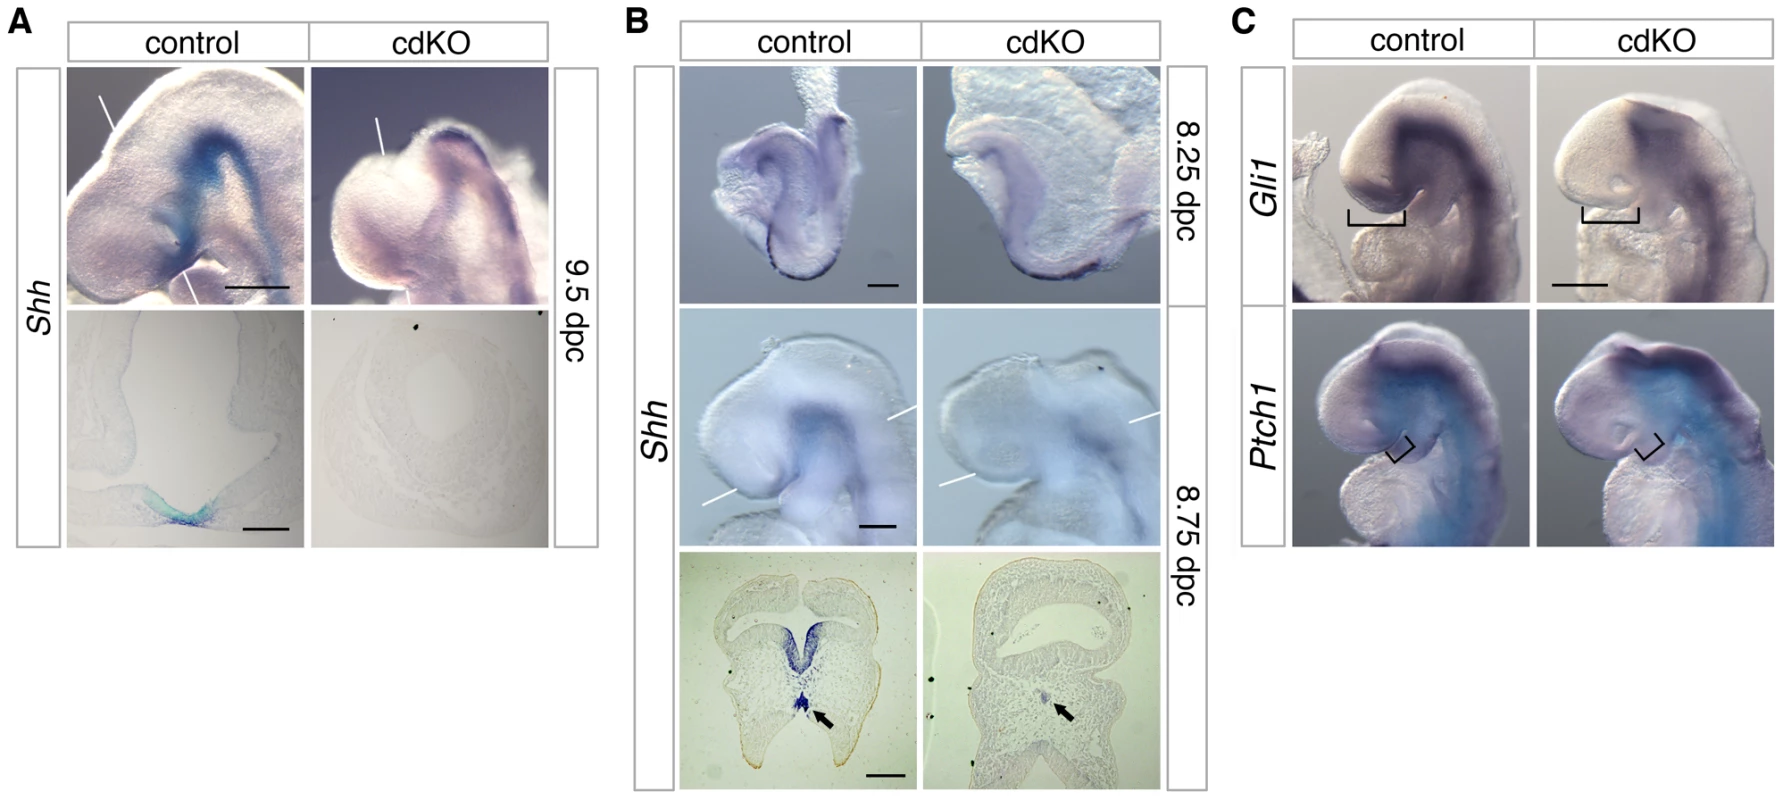 Defective Shh signaling in the forebrain of cdKO embryos.